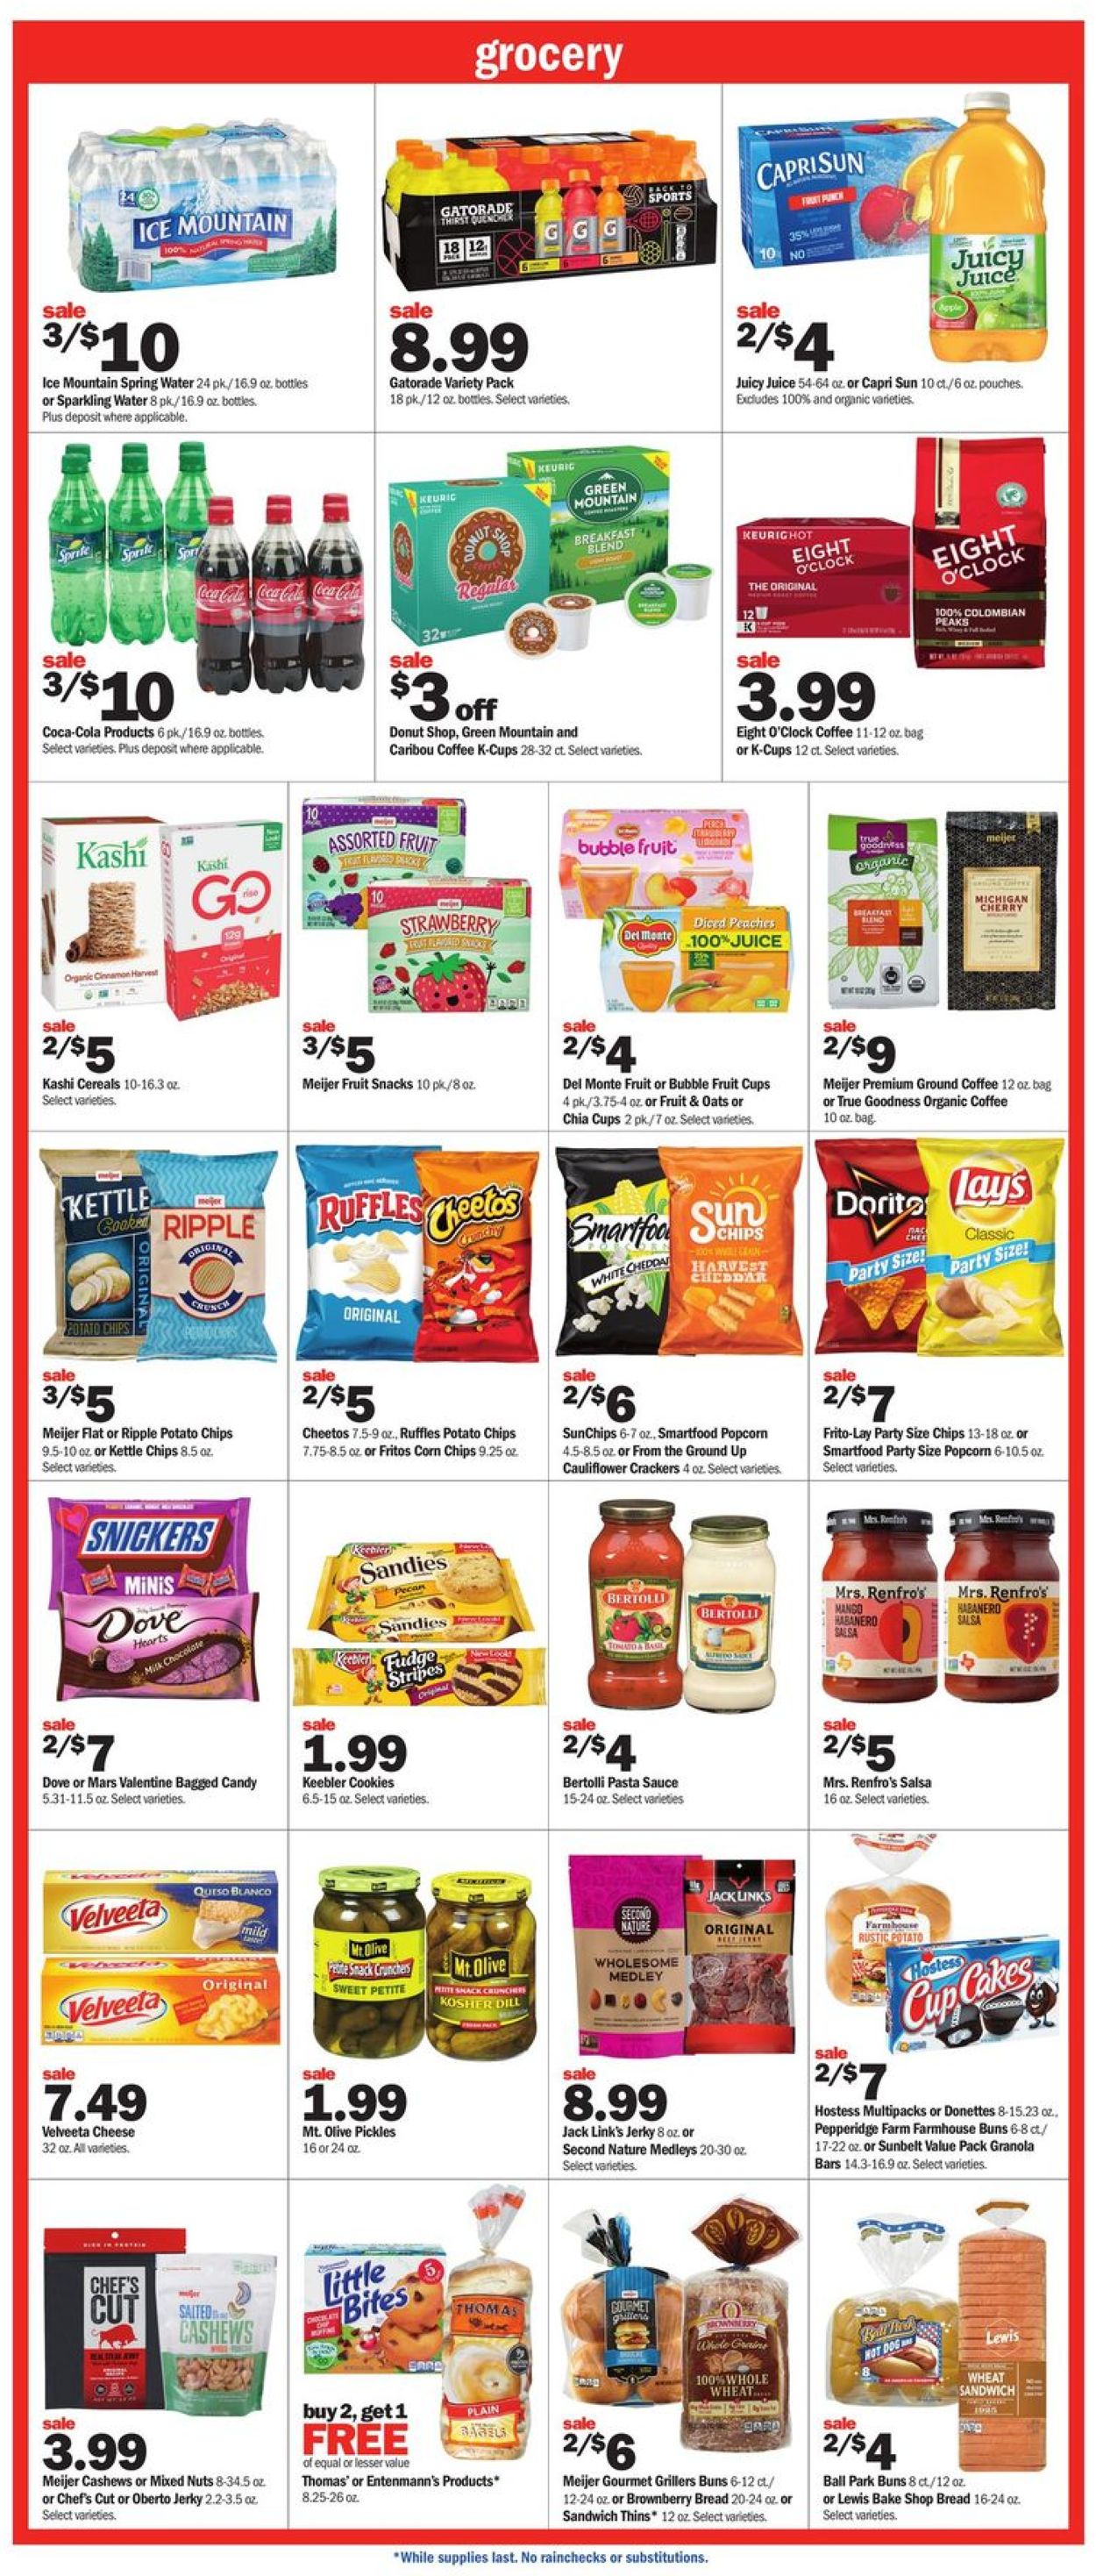 Meijer Current weekly ad 01/12 01/18/2020 [7] frequent